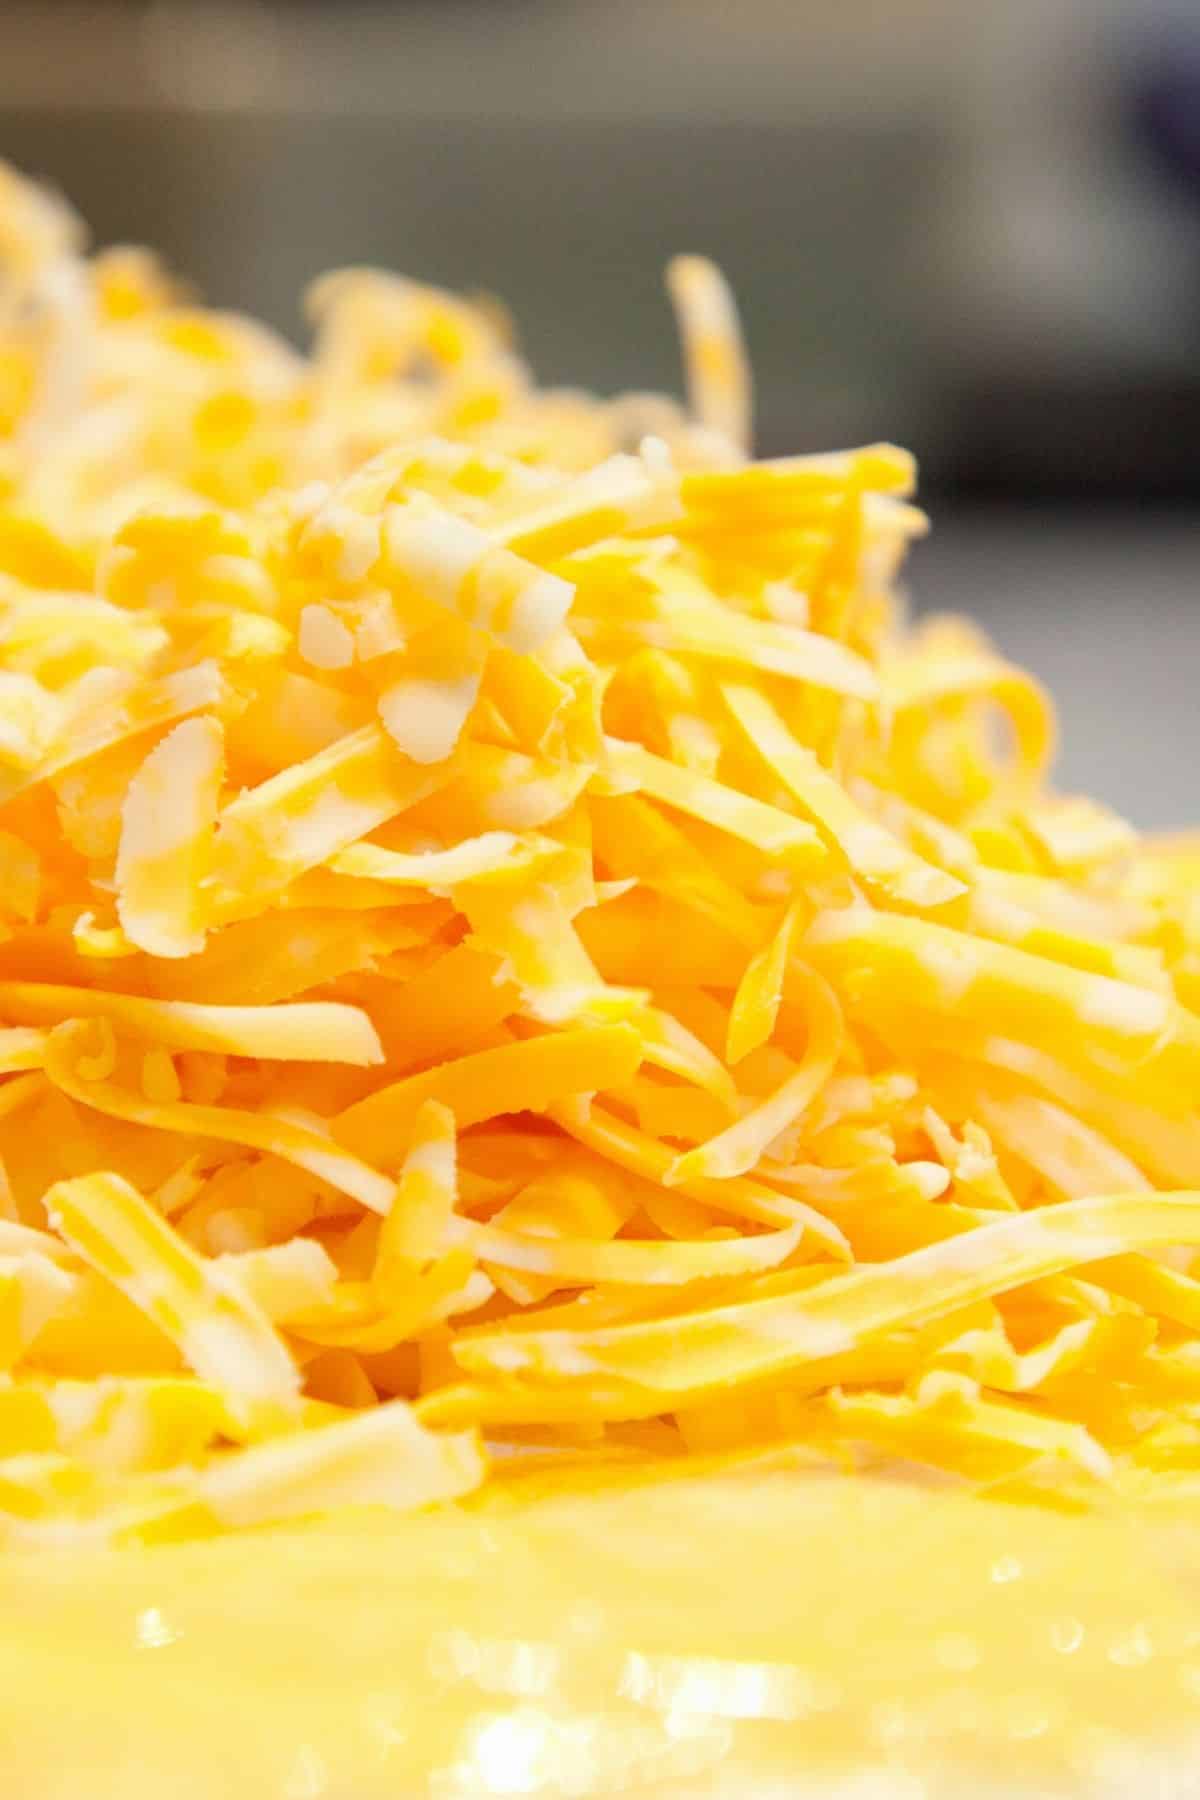 A pile of shredded cheddar cheese.